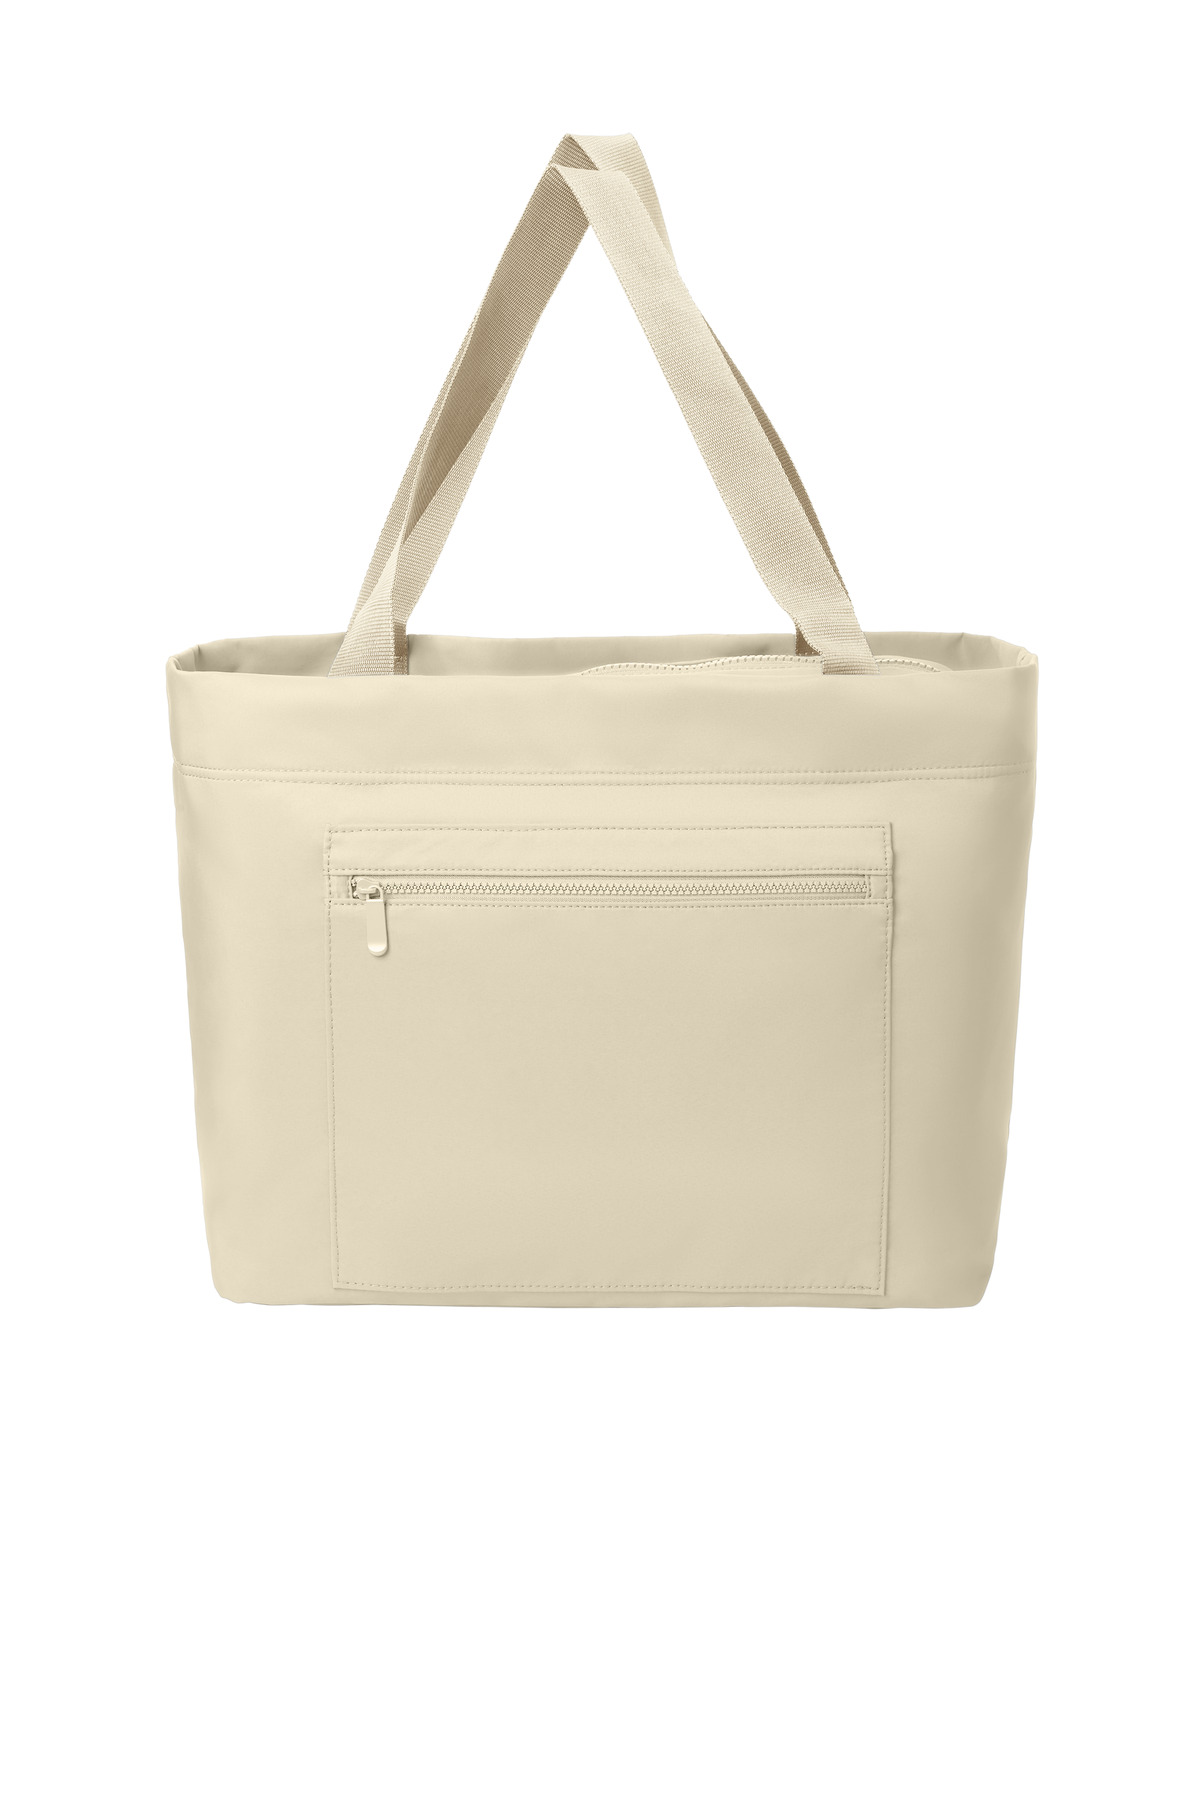 Port Authority Matte Carryall Tote-Port Authority